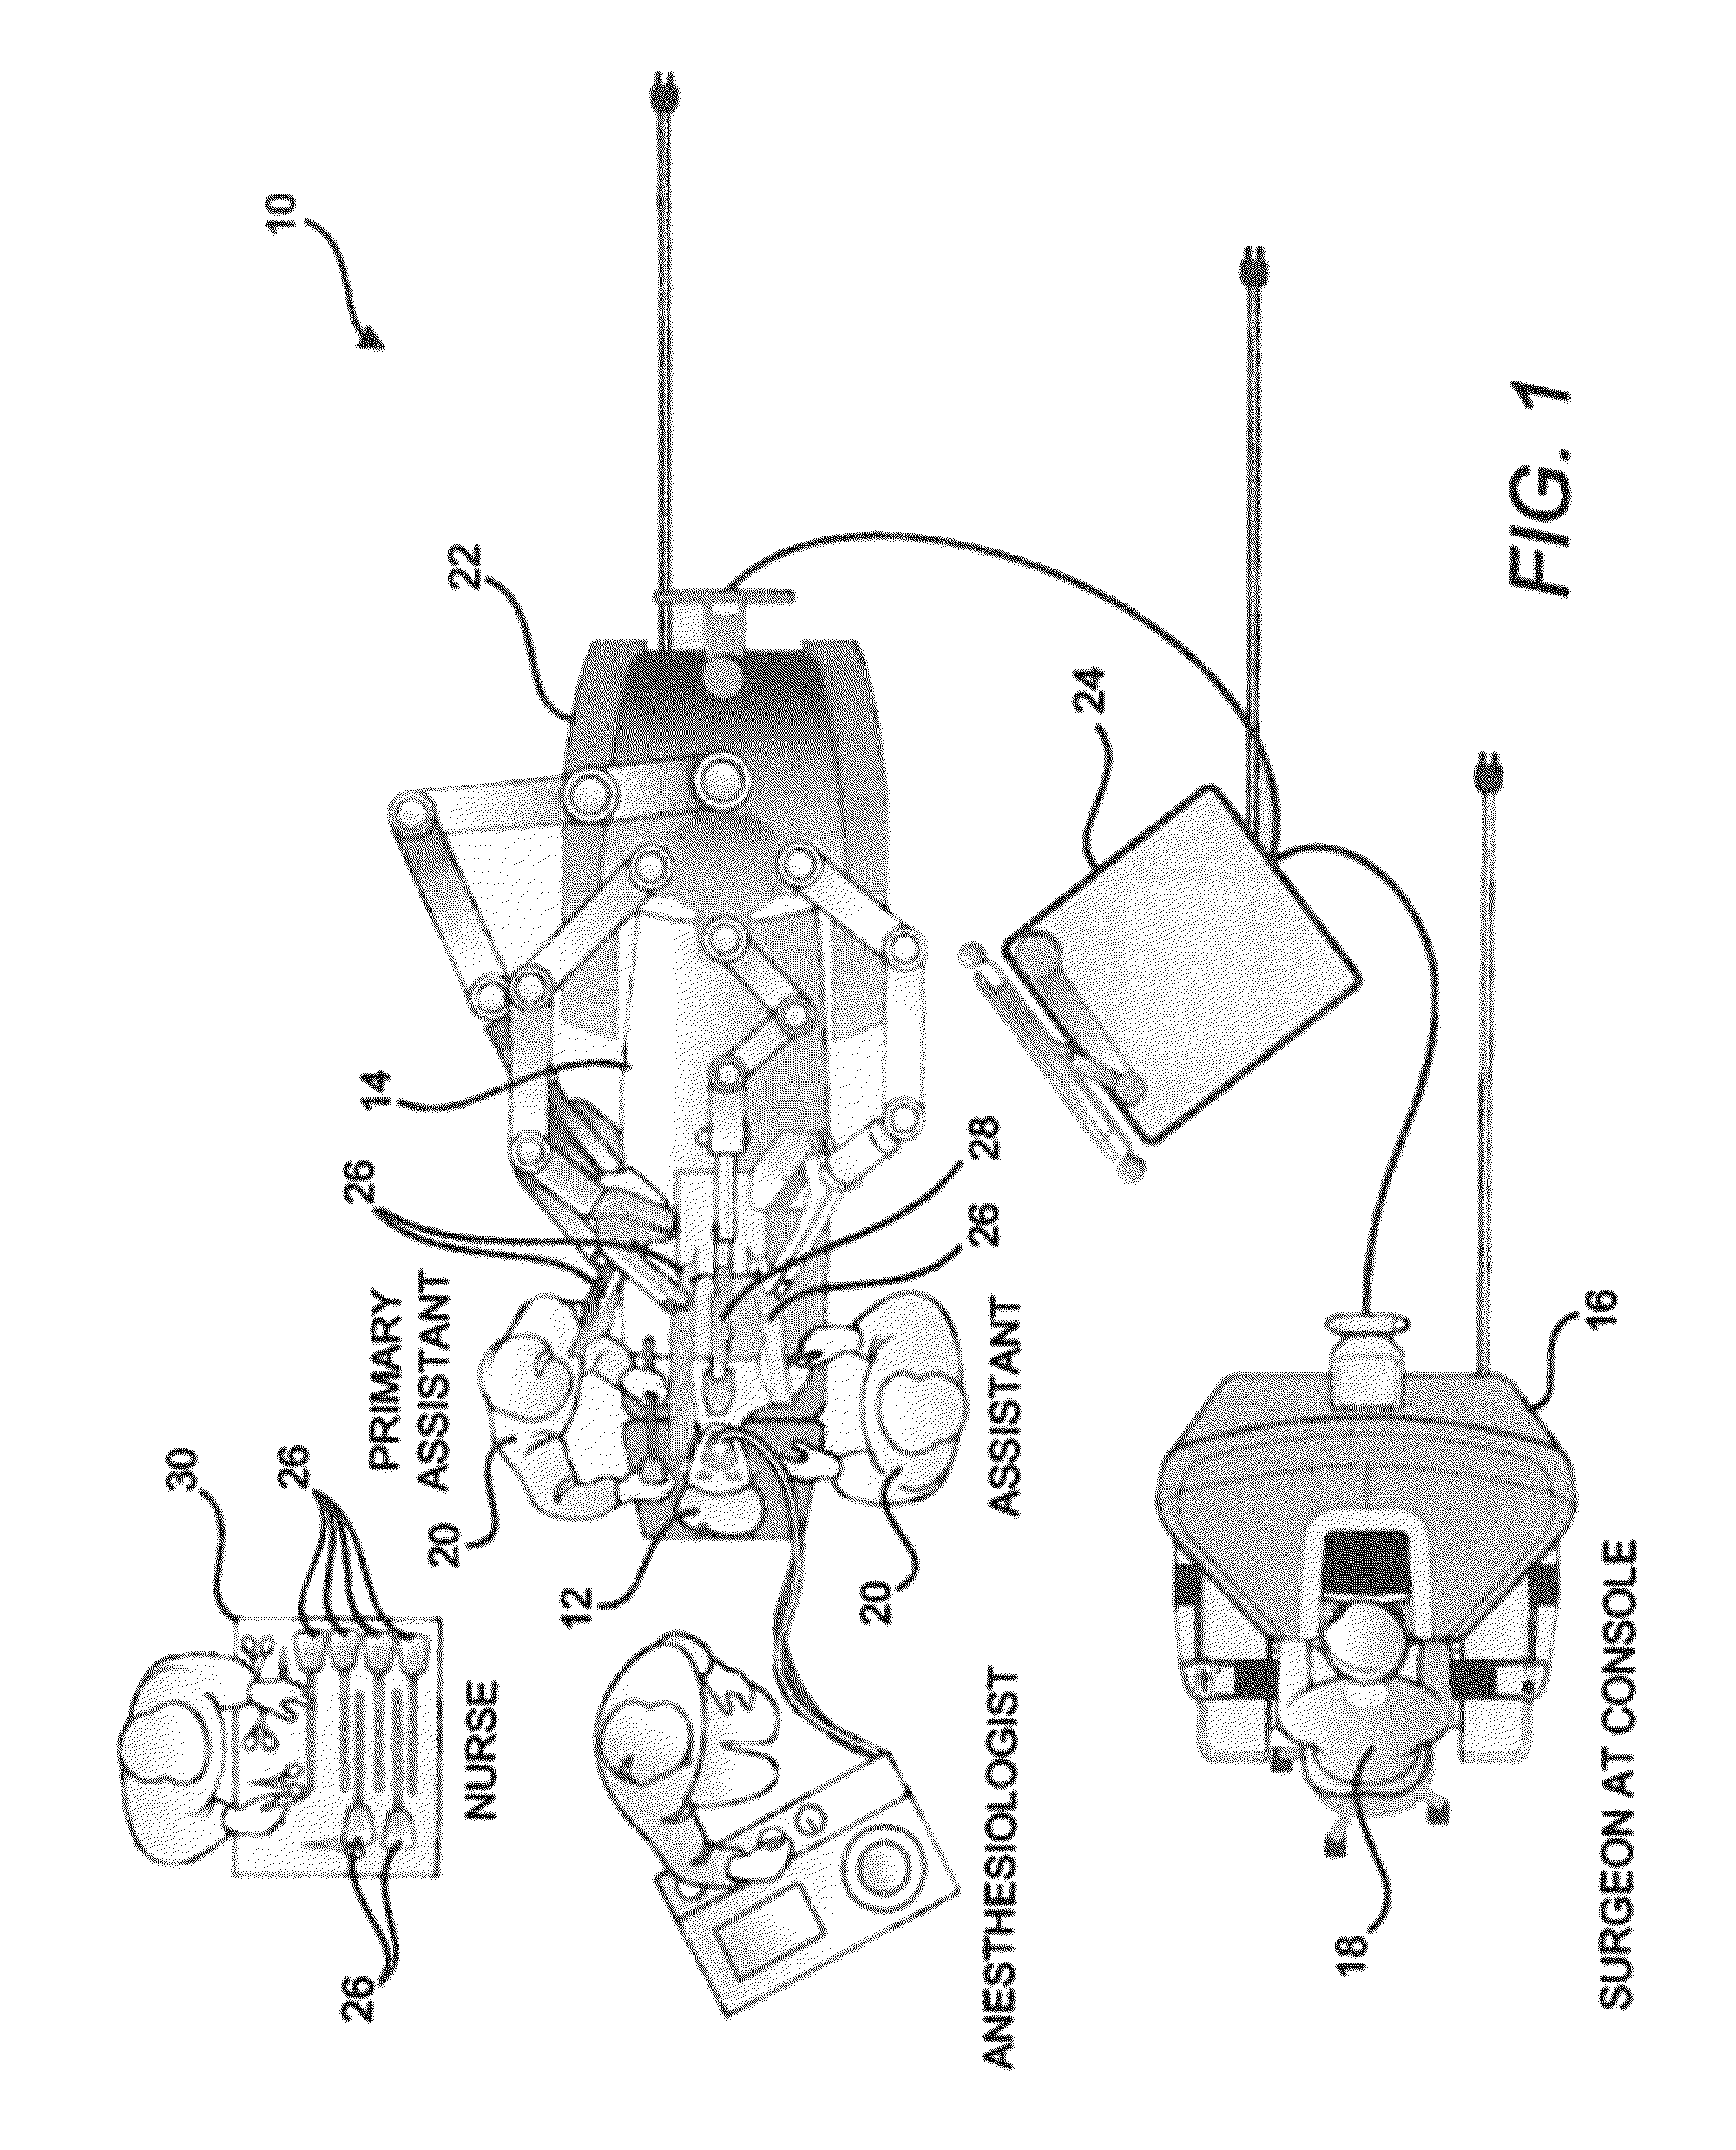 Seals and sealing methods for a surgical instrument having an articulated end effector actuated by a drive shaft